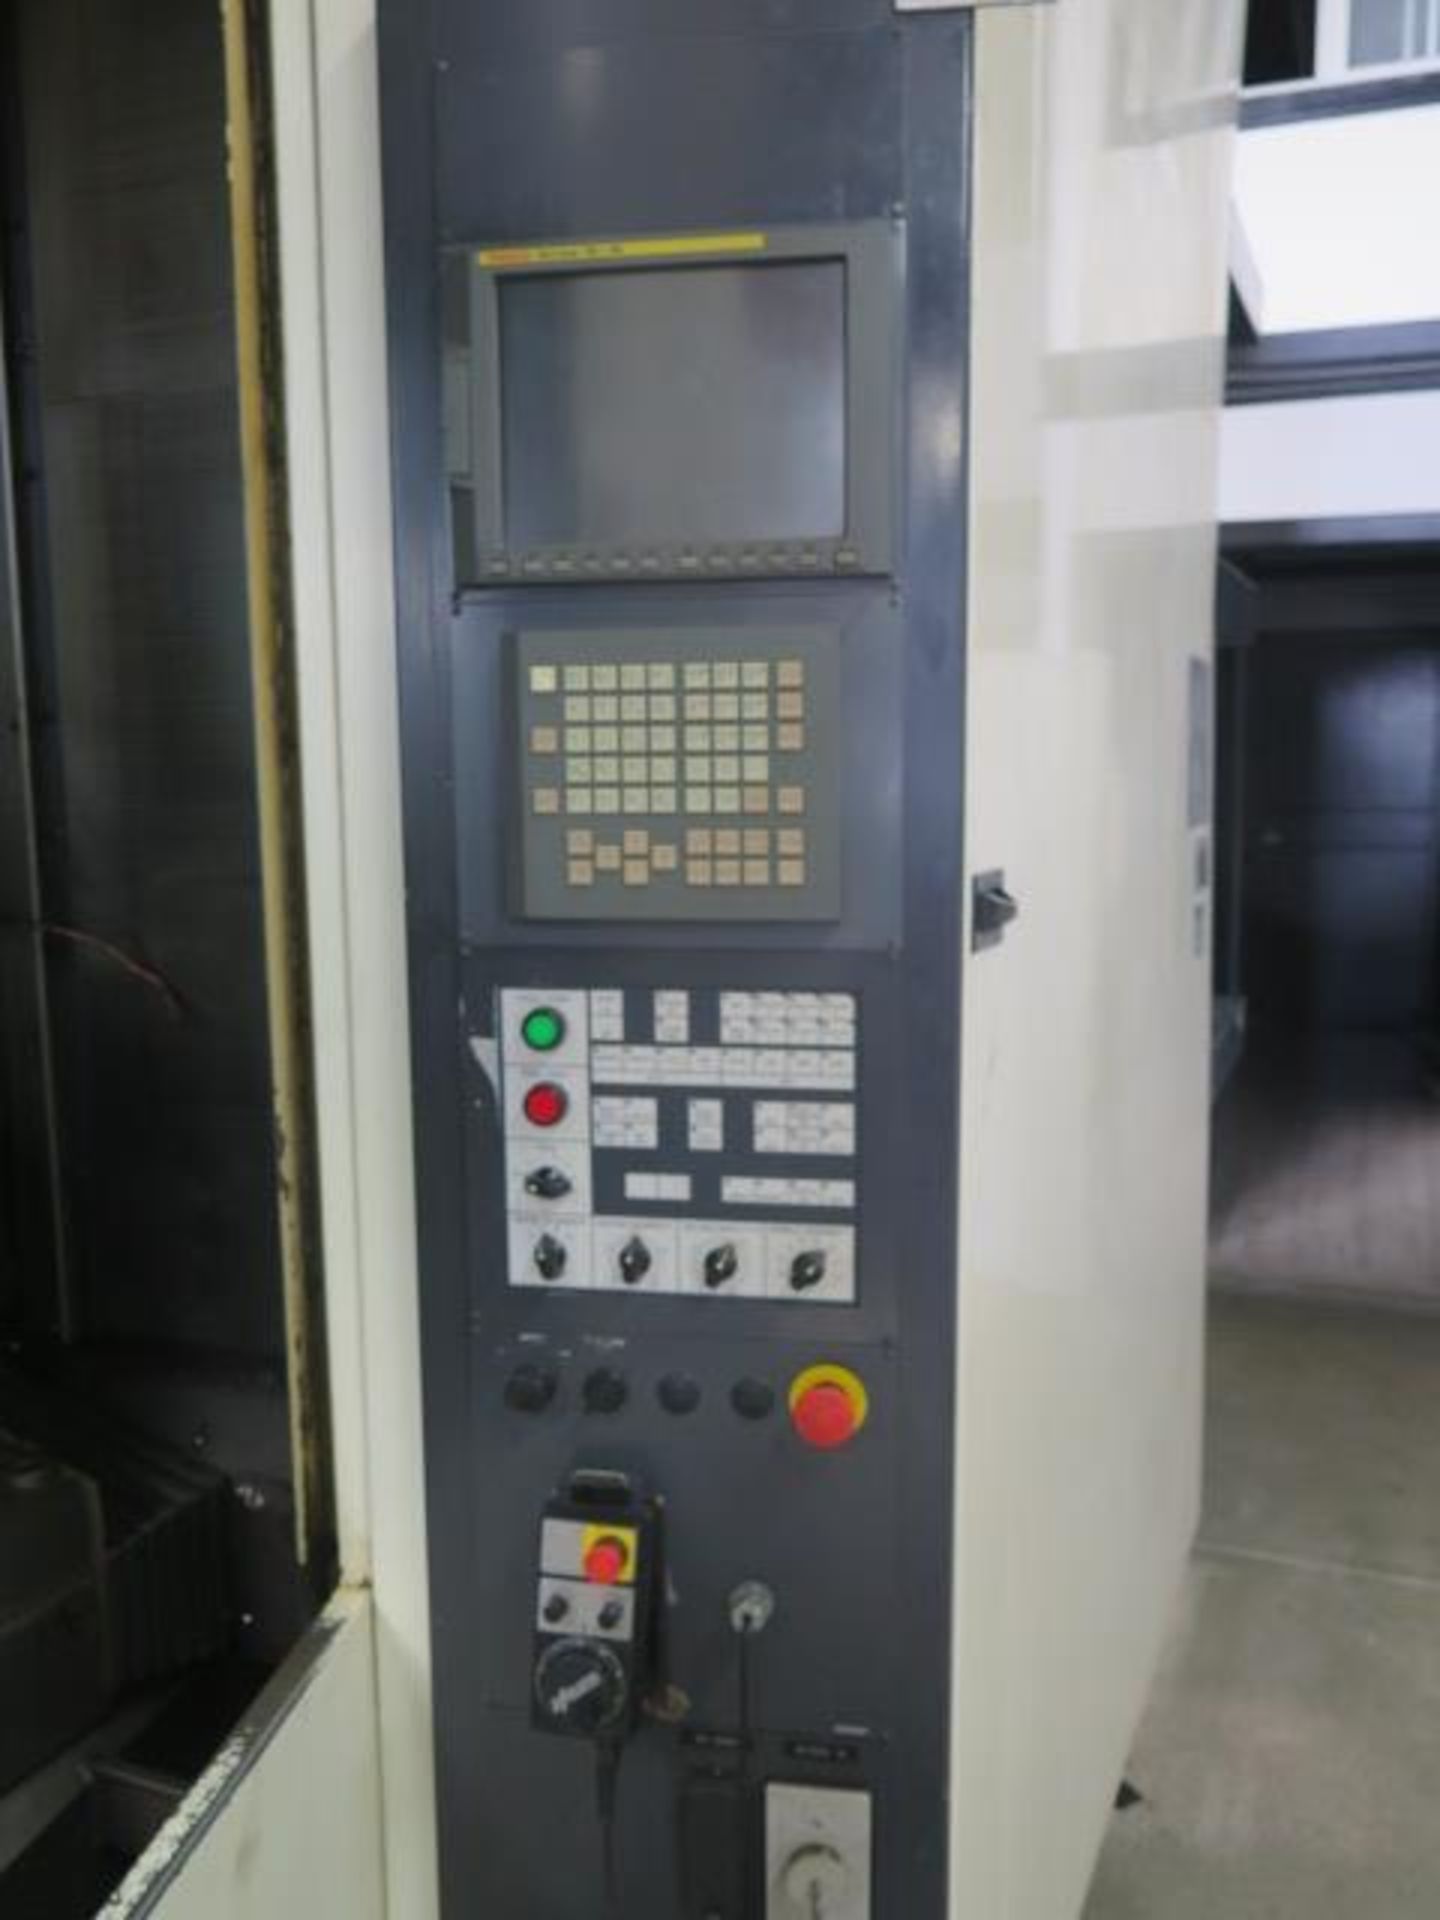 Nigata SPN66 2-Pallet 4-Axis CNC HMC s/n 46600095 w/ Fanuc 16i-M Controls, SOLD AS IS - Image 15 of 24